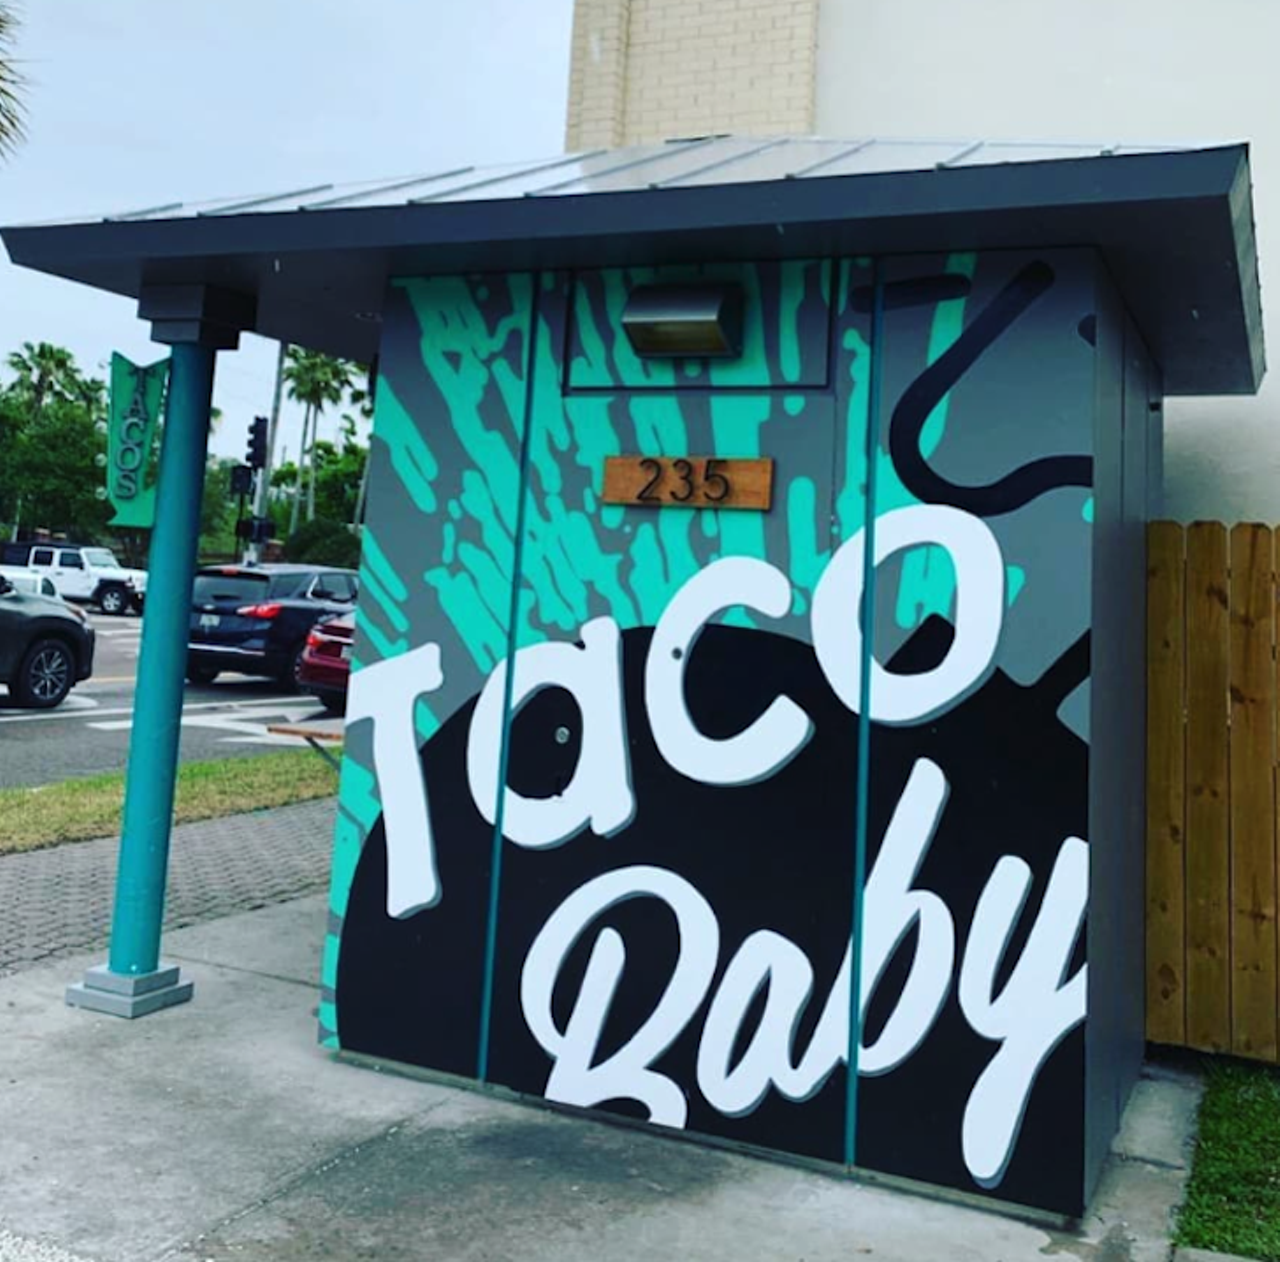 Taco Baby  
235 Main St, Dunedin
Legit the tiniest taco joint around, this place is located inside a renovated ATM. Make sure to take pics. Oh, the street tacos are good too.
Photo via Taco Baby/Facebook